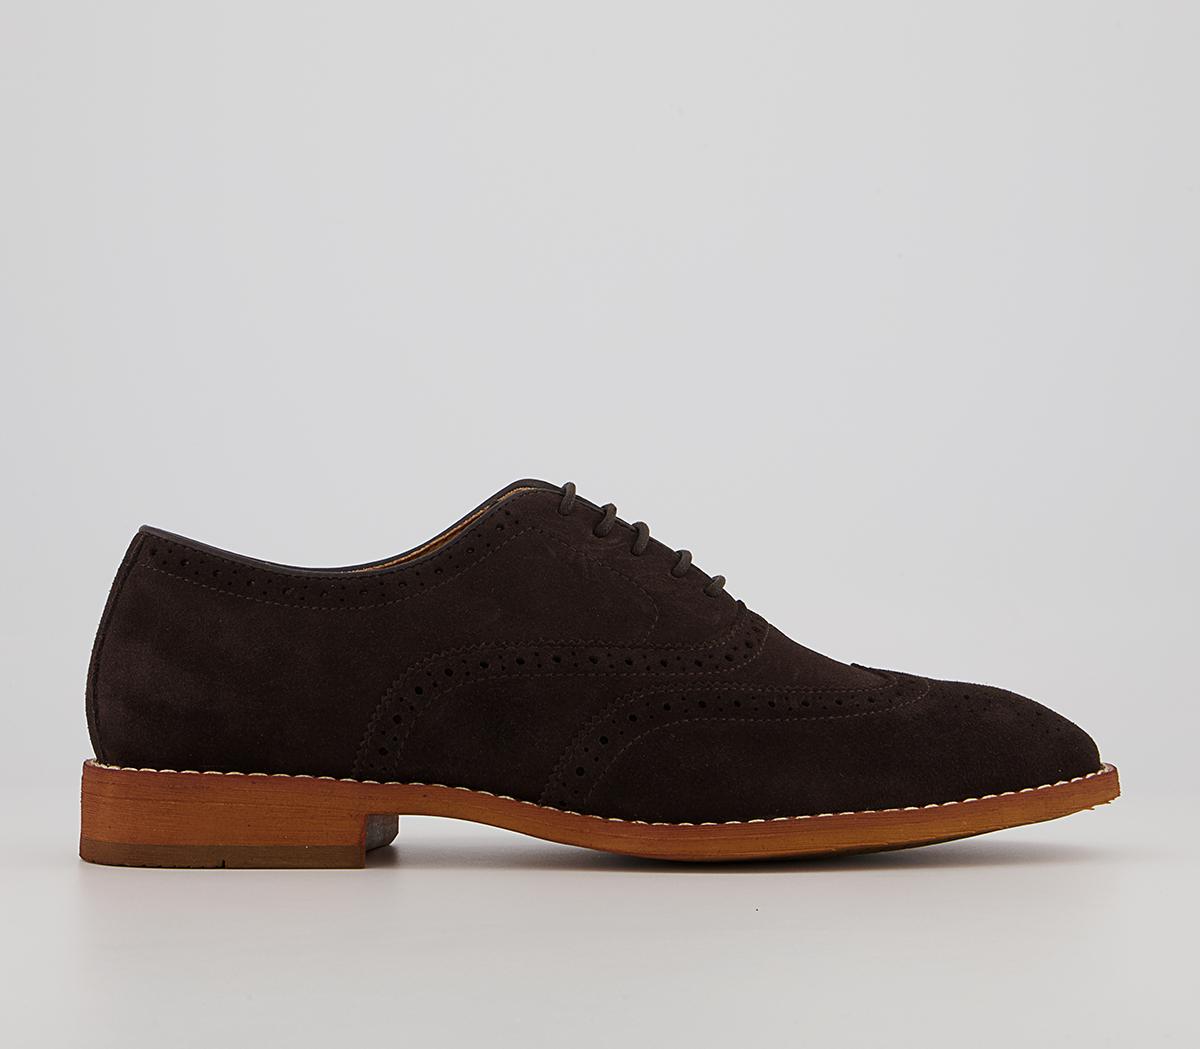 OfficeMeanest Oxford BroguesBrown Suede